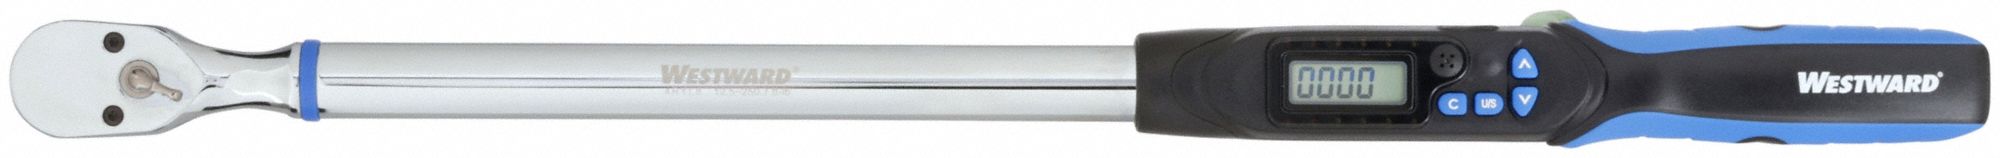 ELECTRONIC TORQUE WRENCH,1/2DR,25-19/32L